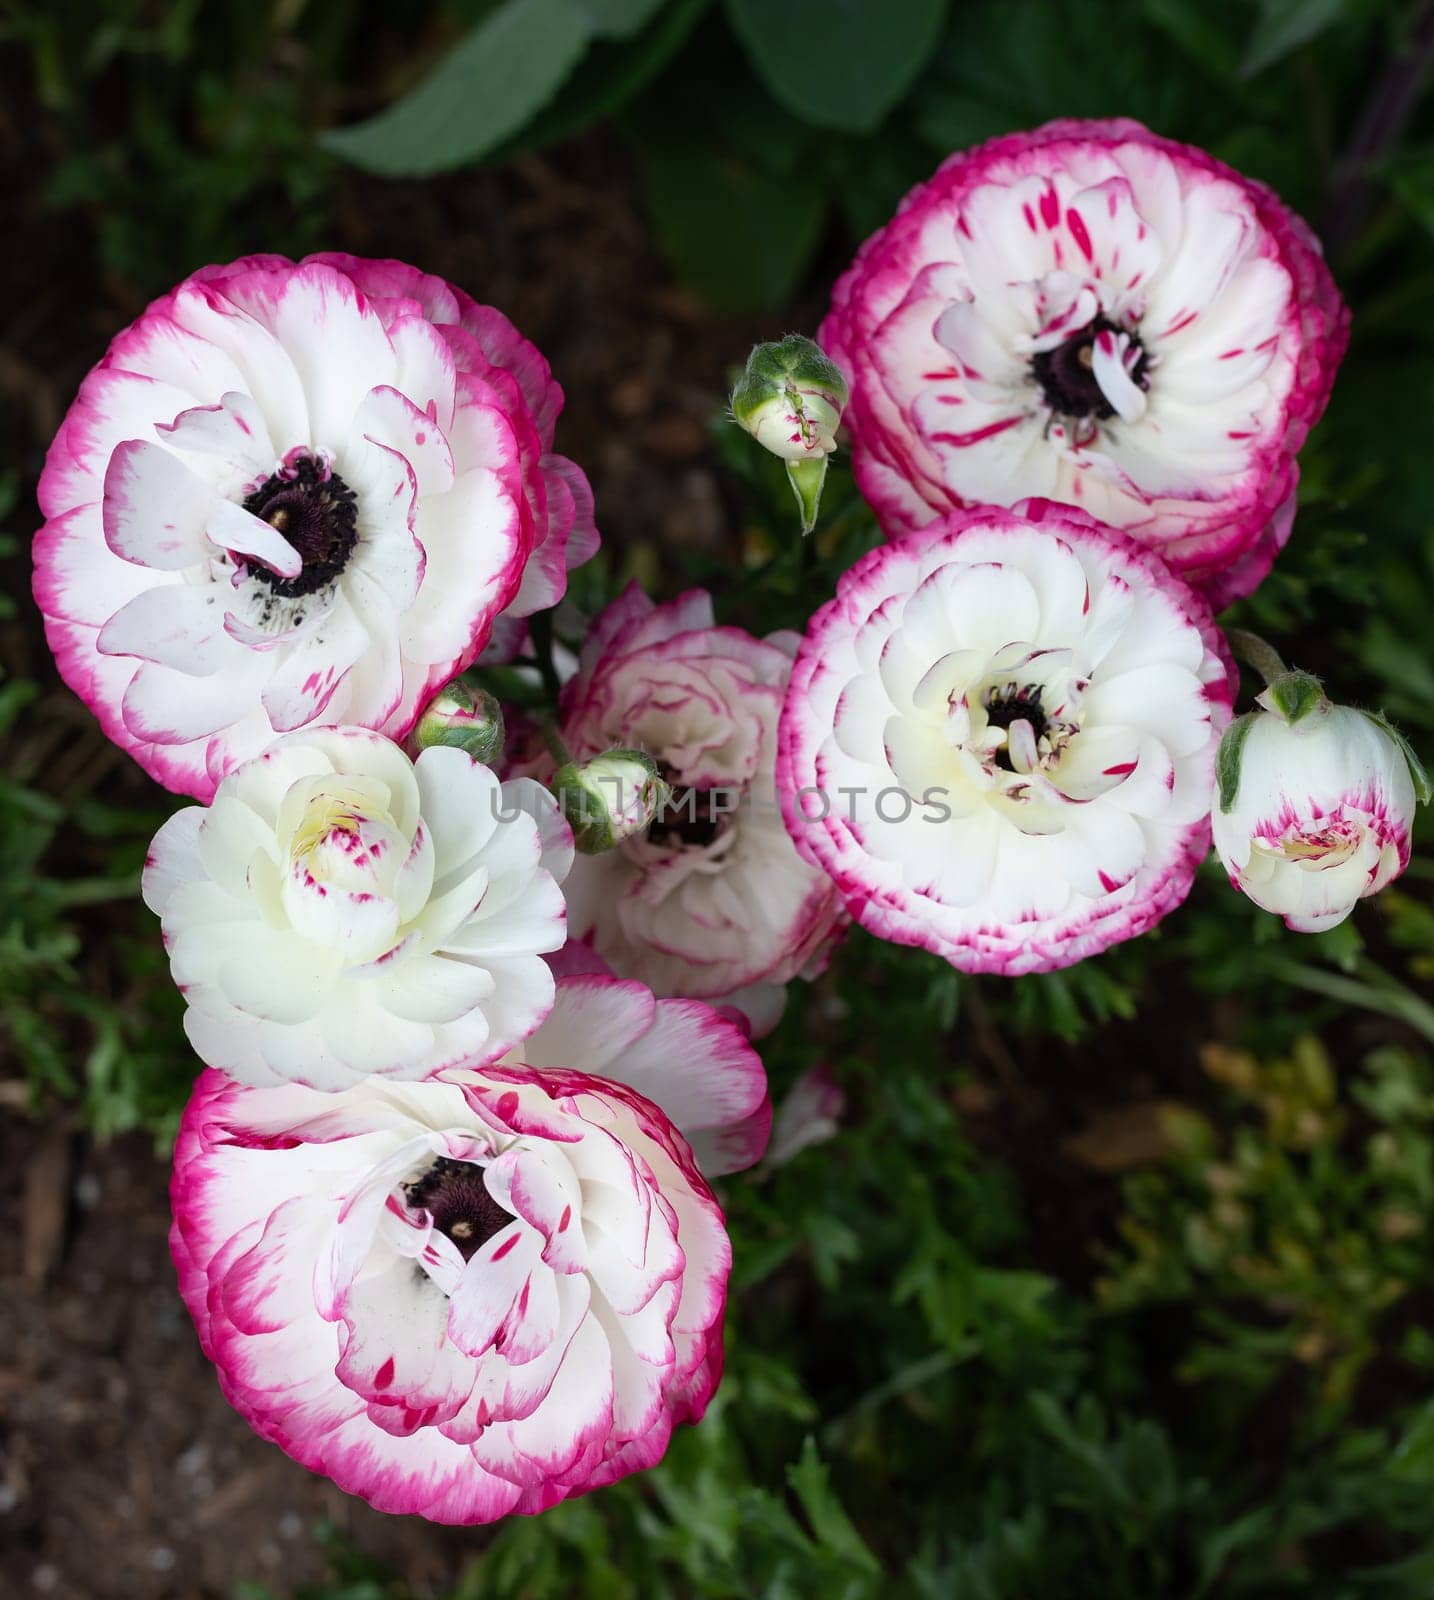 Closeup White and Purple Rimmed Persian buttercup flowers or Ranunculus asiaticus Outdoors in Garden or Plant Nursery. Vertical Plane Botany, Floriculture. High quality photo.